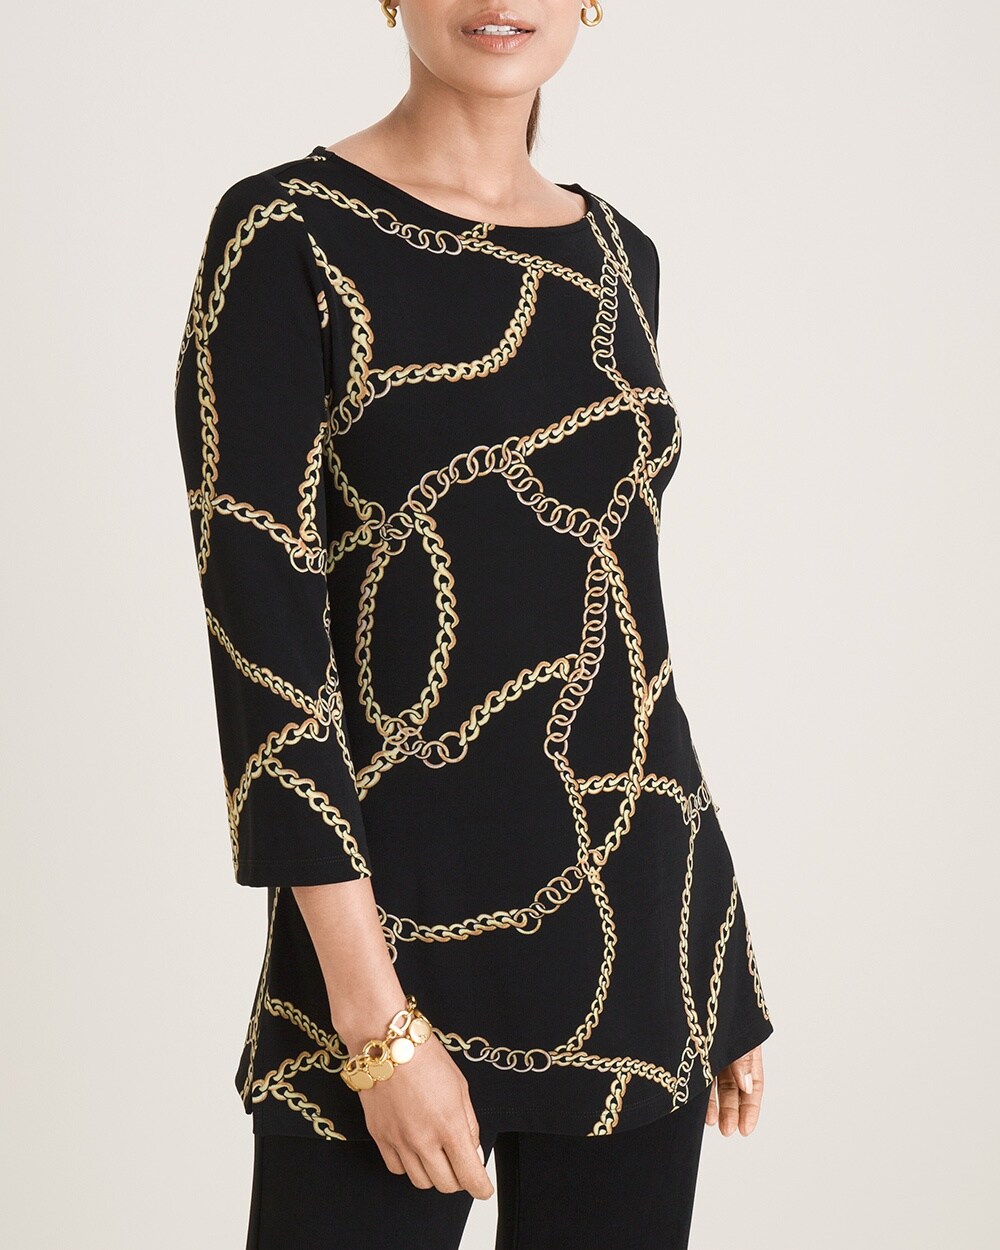 Travelers Classic Printed Bell-Sleeve Tunic